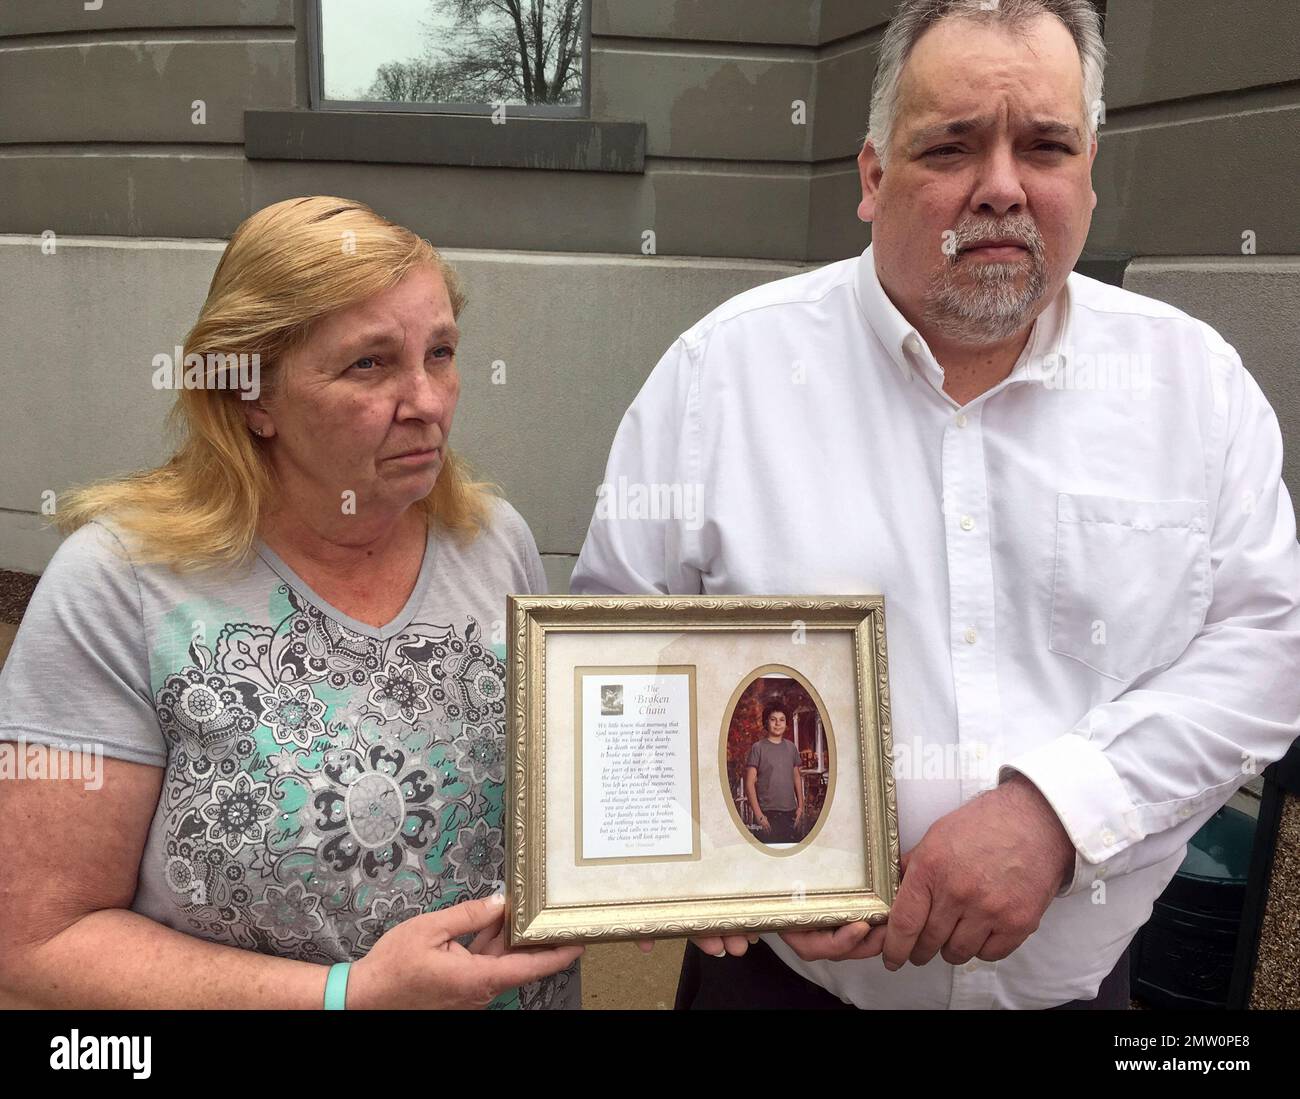 Ann and Mark Phillips hold a picture of their late son Joe outside